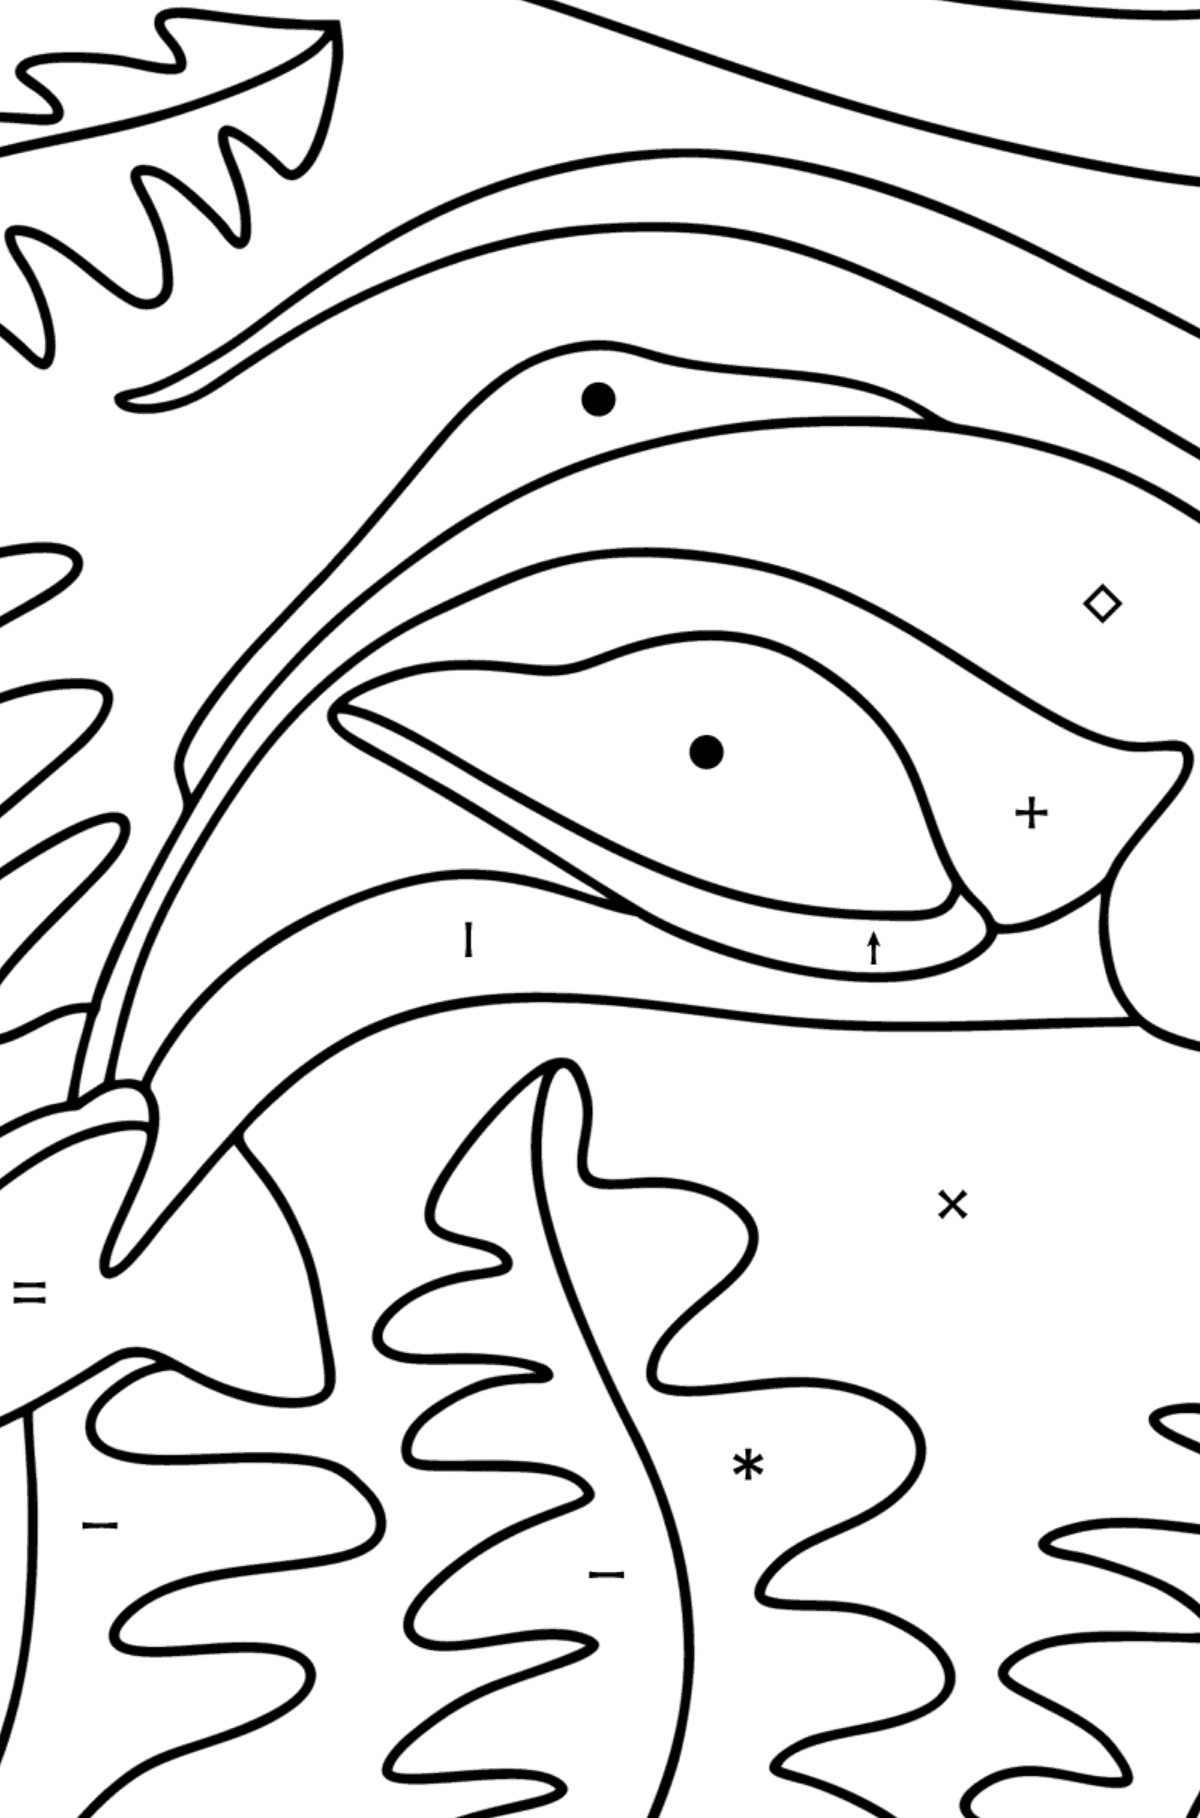 Chinese River Dolphin coloring page - Coloring by Symbols for Kids